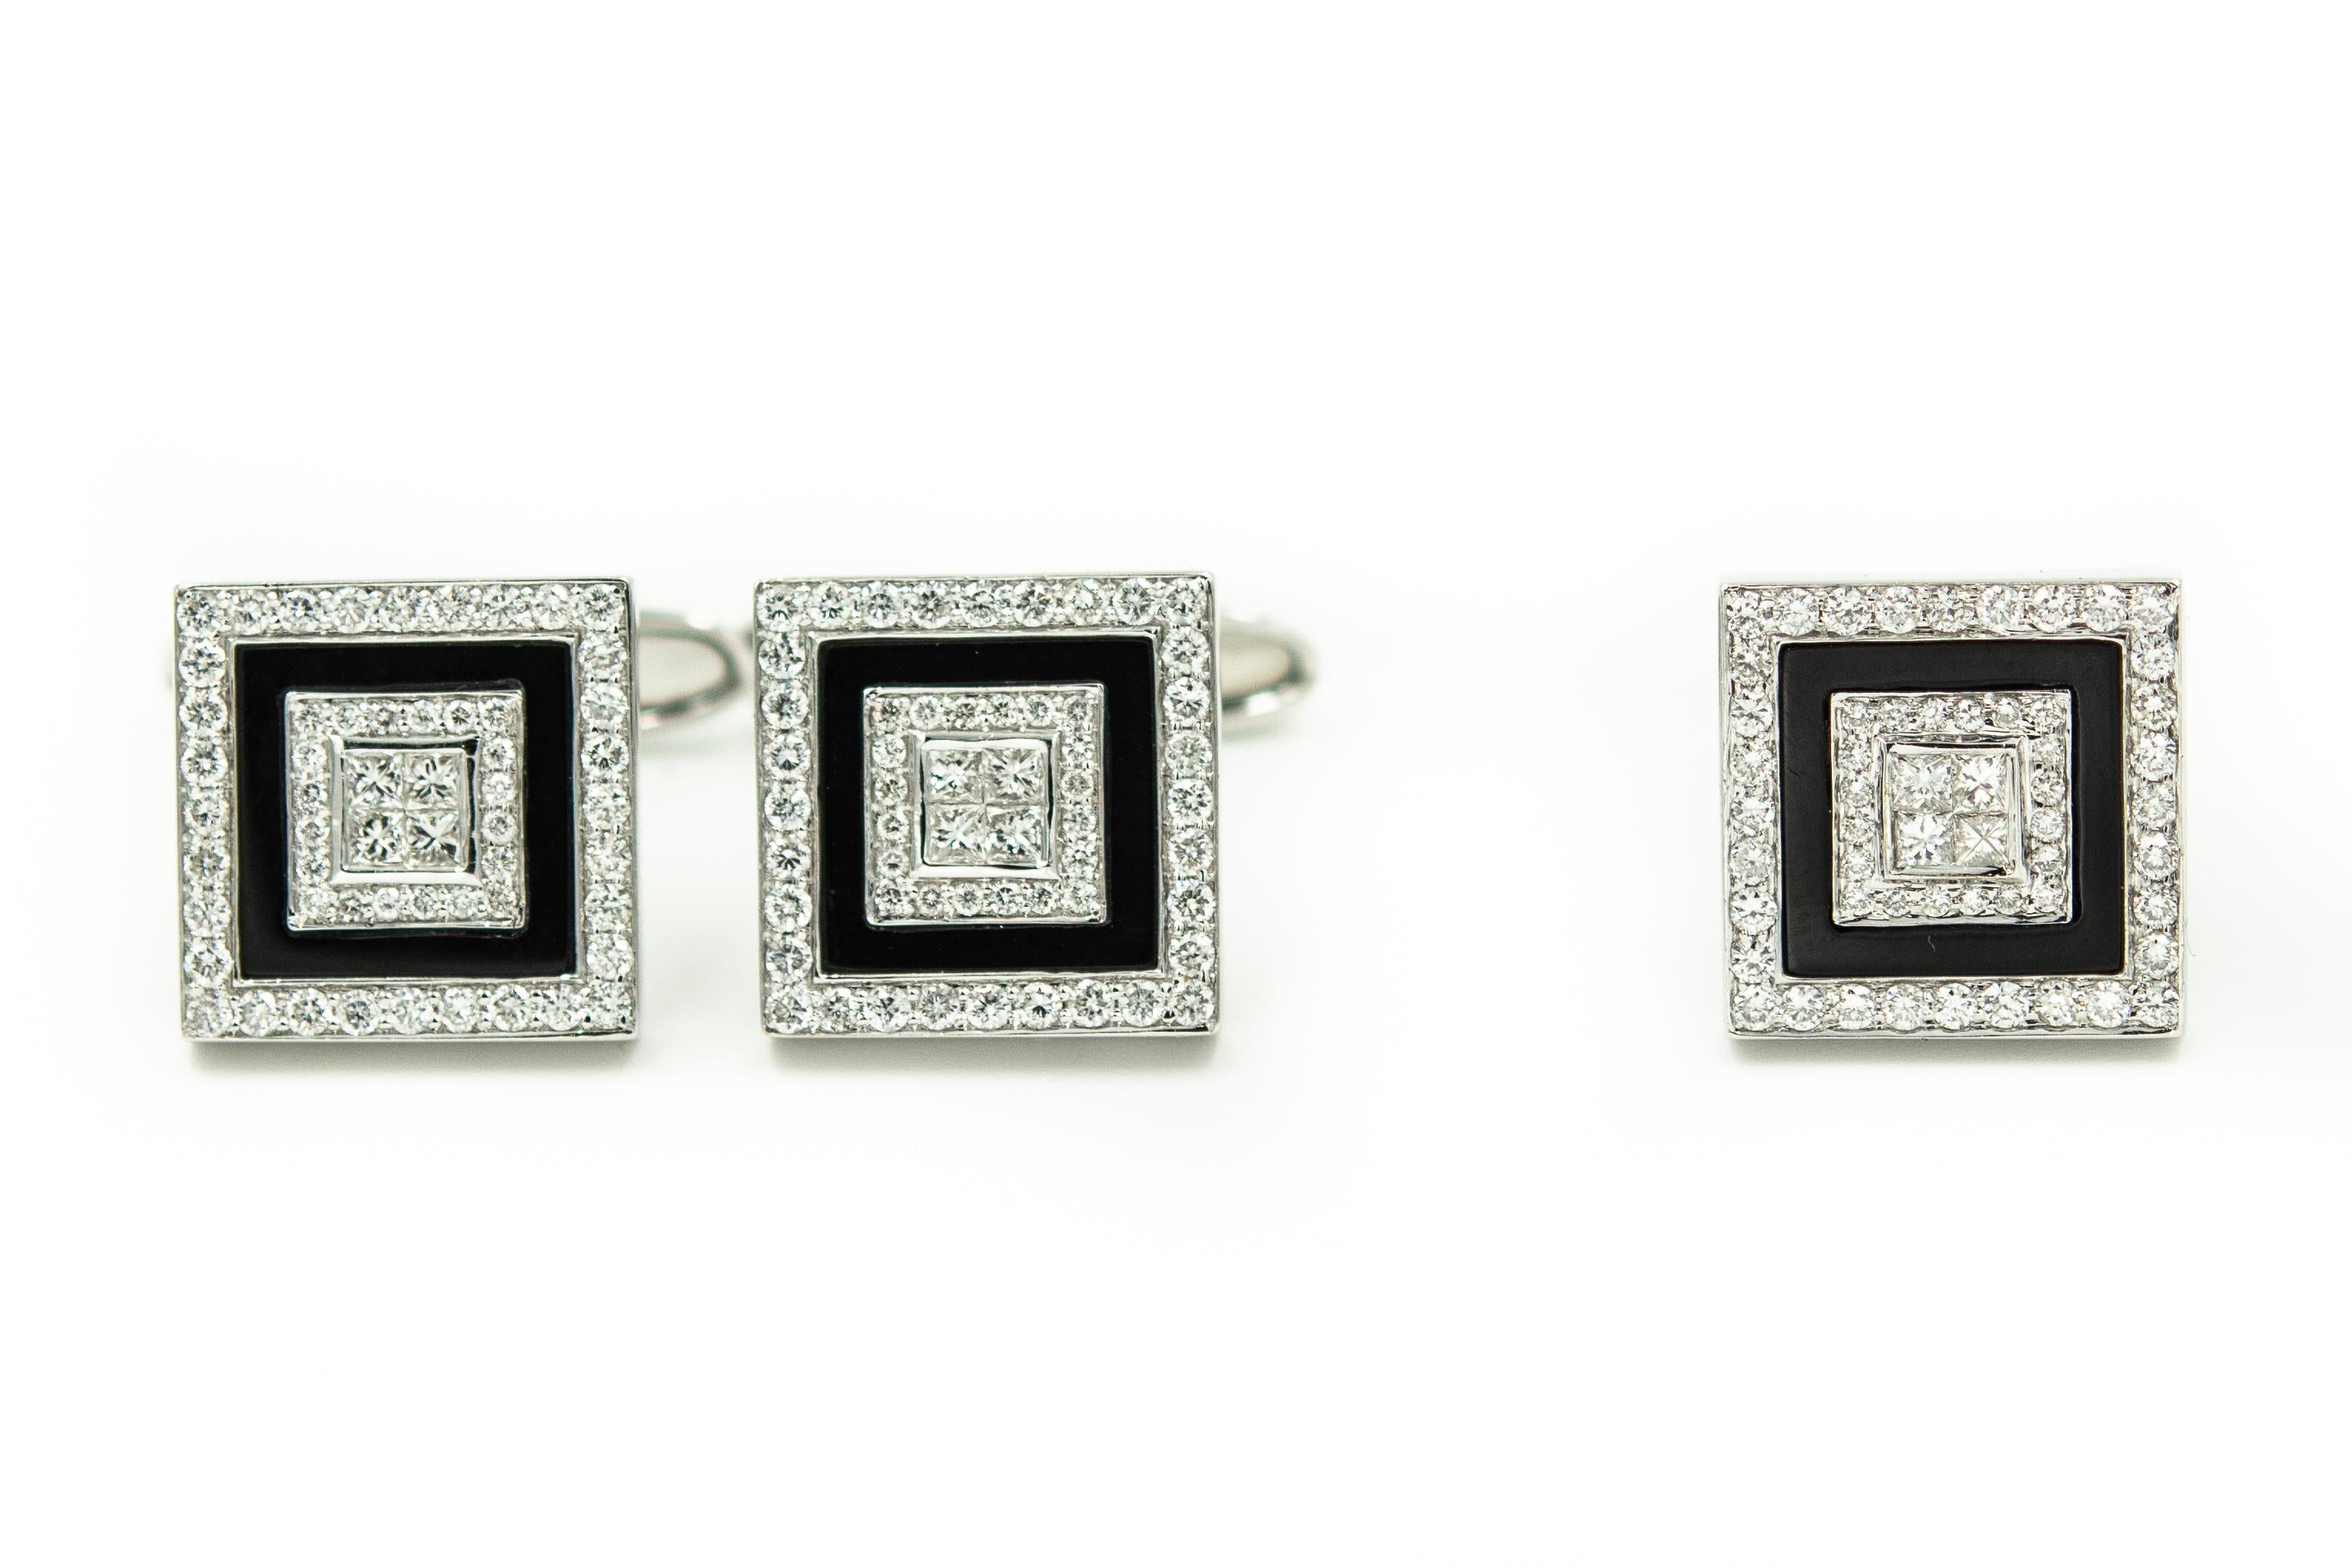 These elegant art deco style 18k white gold square cufflinks and tie-tac feature a center section with 4 princess cut diamonds with an outer border of 20 round diamonds in each piece followed by an onyx frame concluding with another round diamond